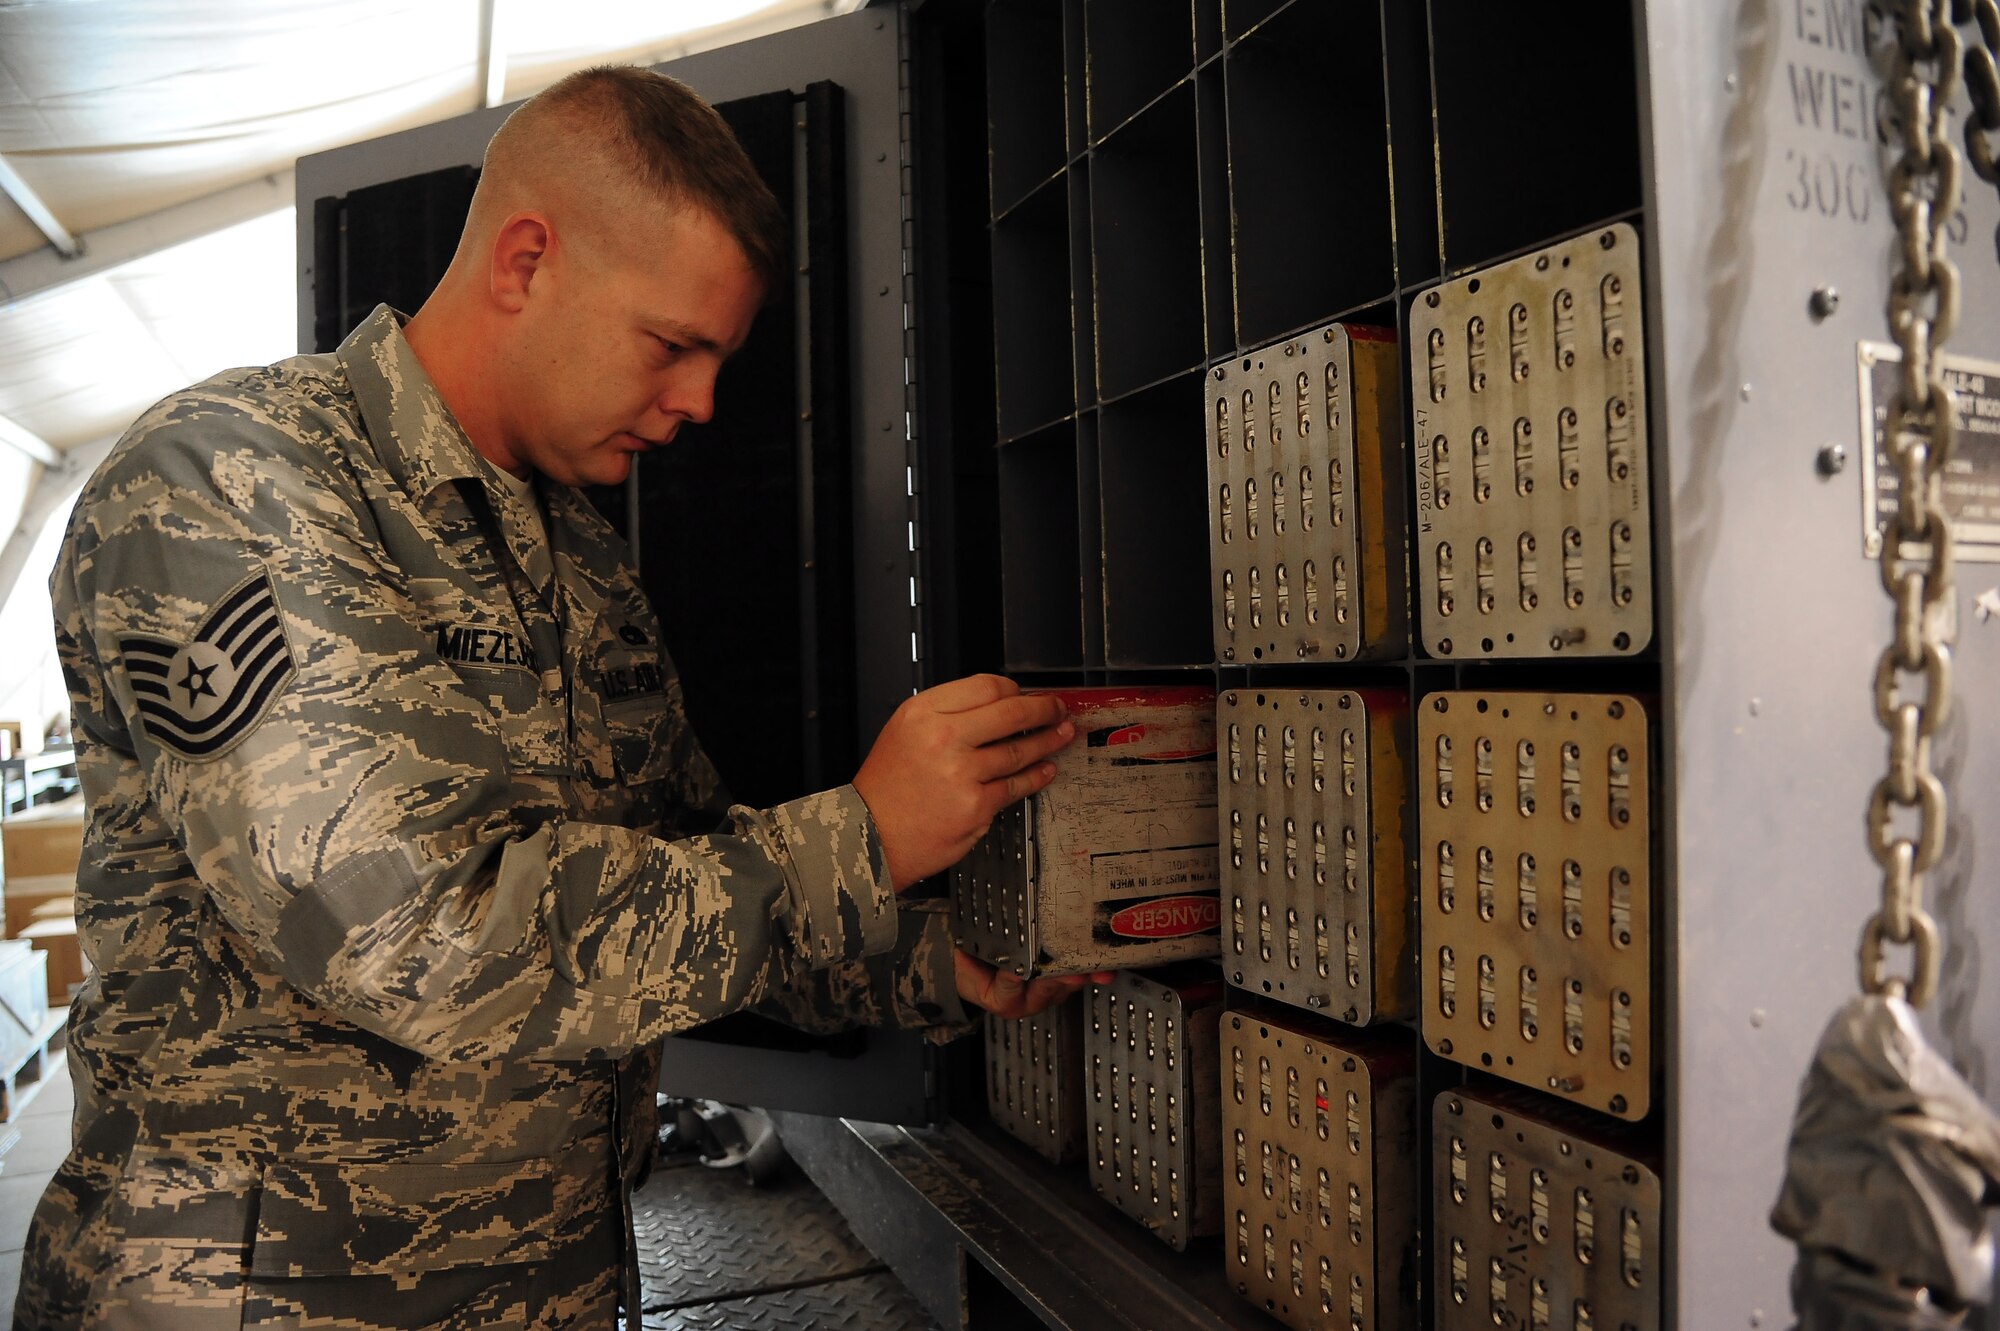 U.S. Air Force Tech. Sgt. Craig Miezejeski, a munitions controller from the 35th Maintenance Squadron at Misawa Air Base, Japan, inspects chaff and flare modules during Exercise Eager Lion June 4, 2014, at an air base in northern Jordan. Throughout the two-week multinational exercise, the Ammo Airmen provided various types of munitions for F-16 Fighting Falcons to use during scenarios that reflect modern-day security concerns. (U.S. Air Force photo by Staff Sgt. Brigitte N. Brantley/Released)